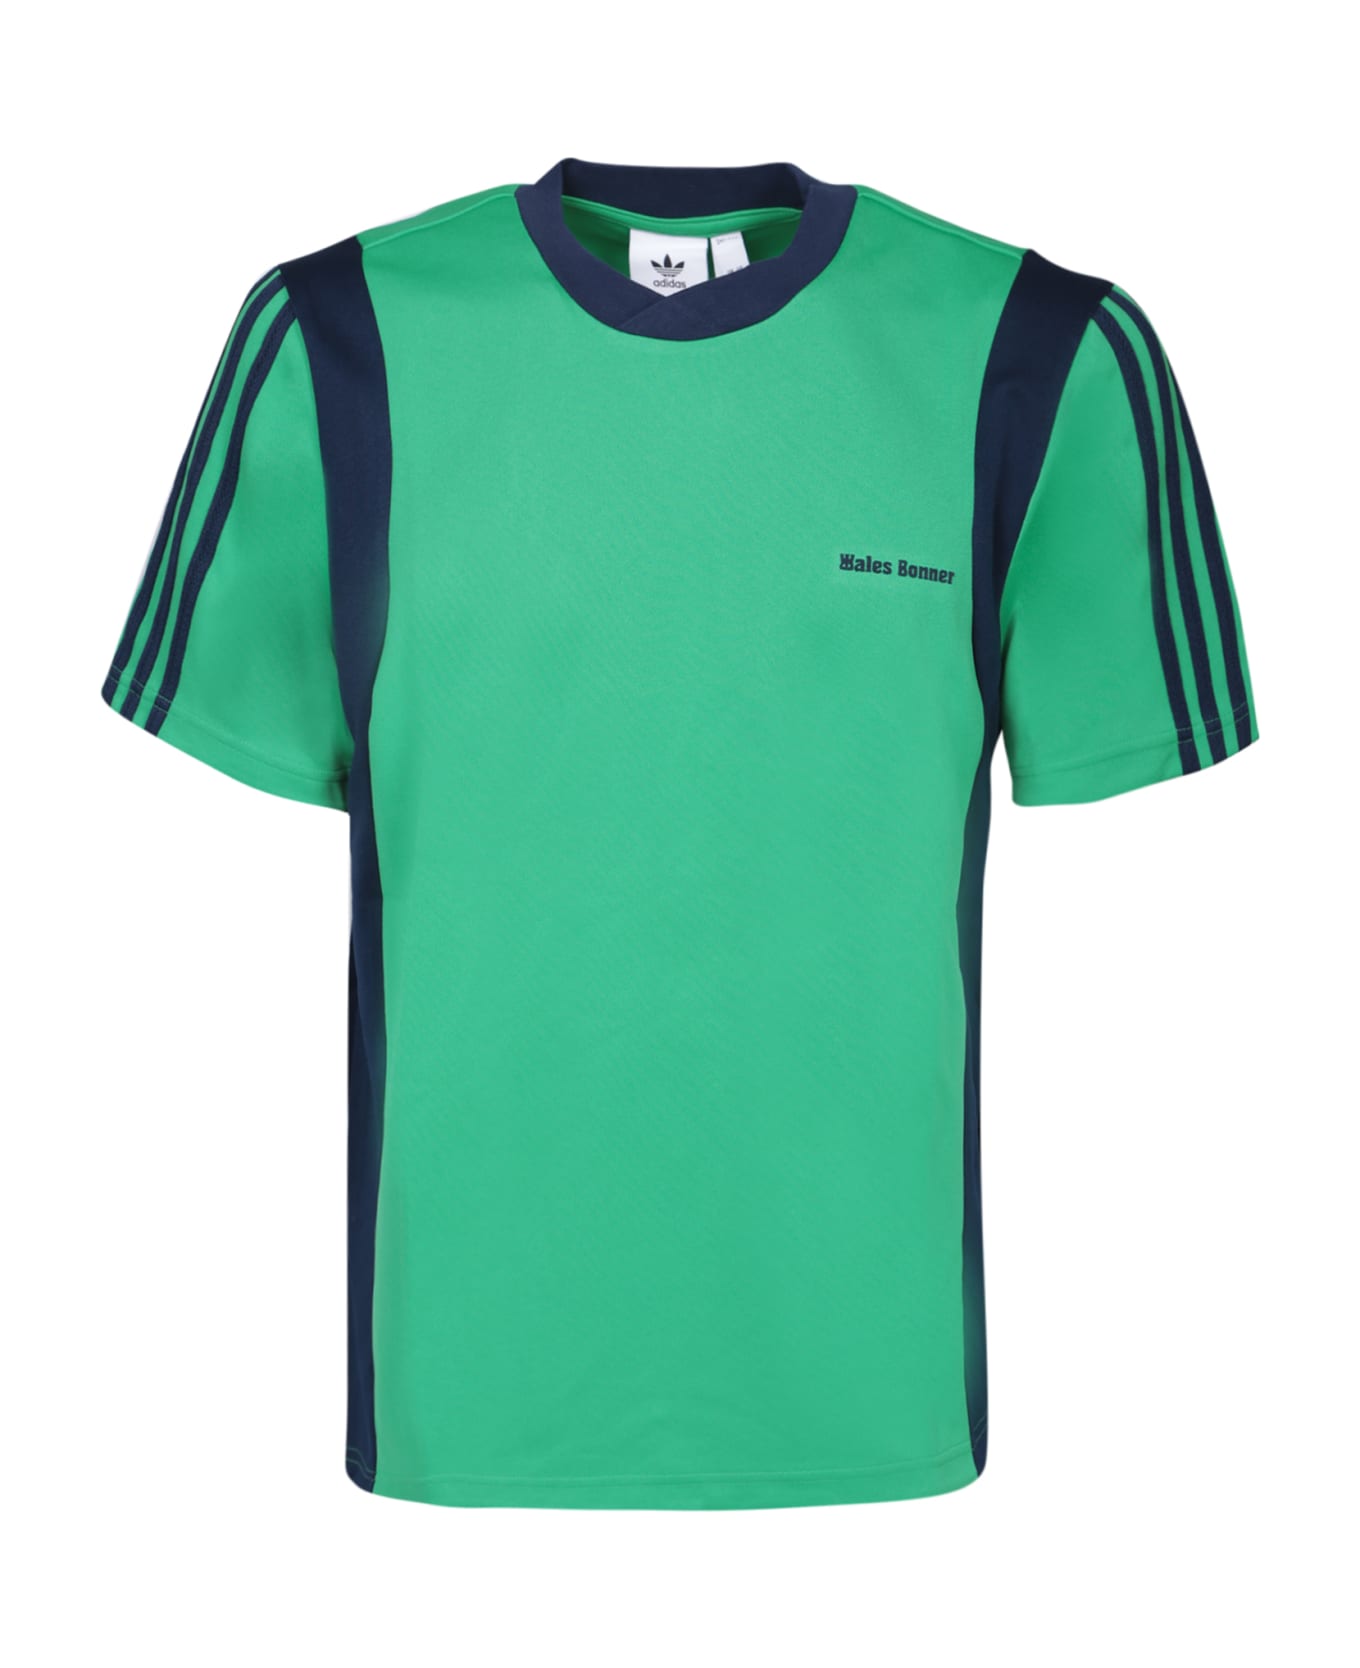 Y-3 Striped Details Green T-shirt - Green